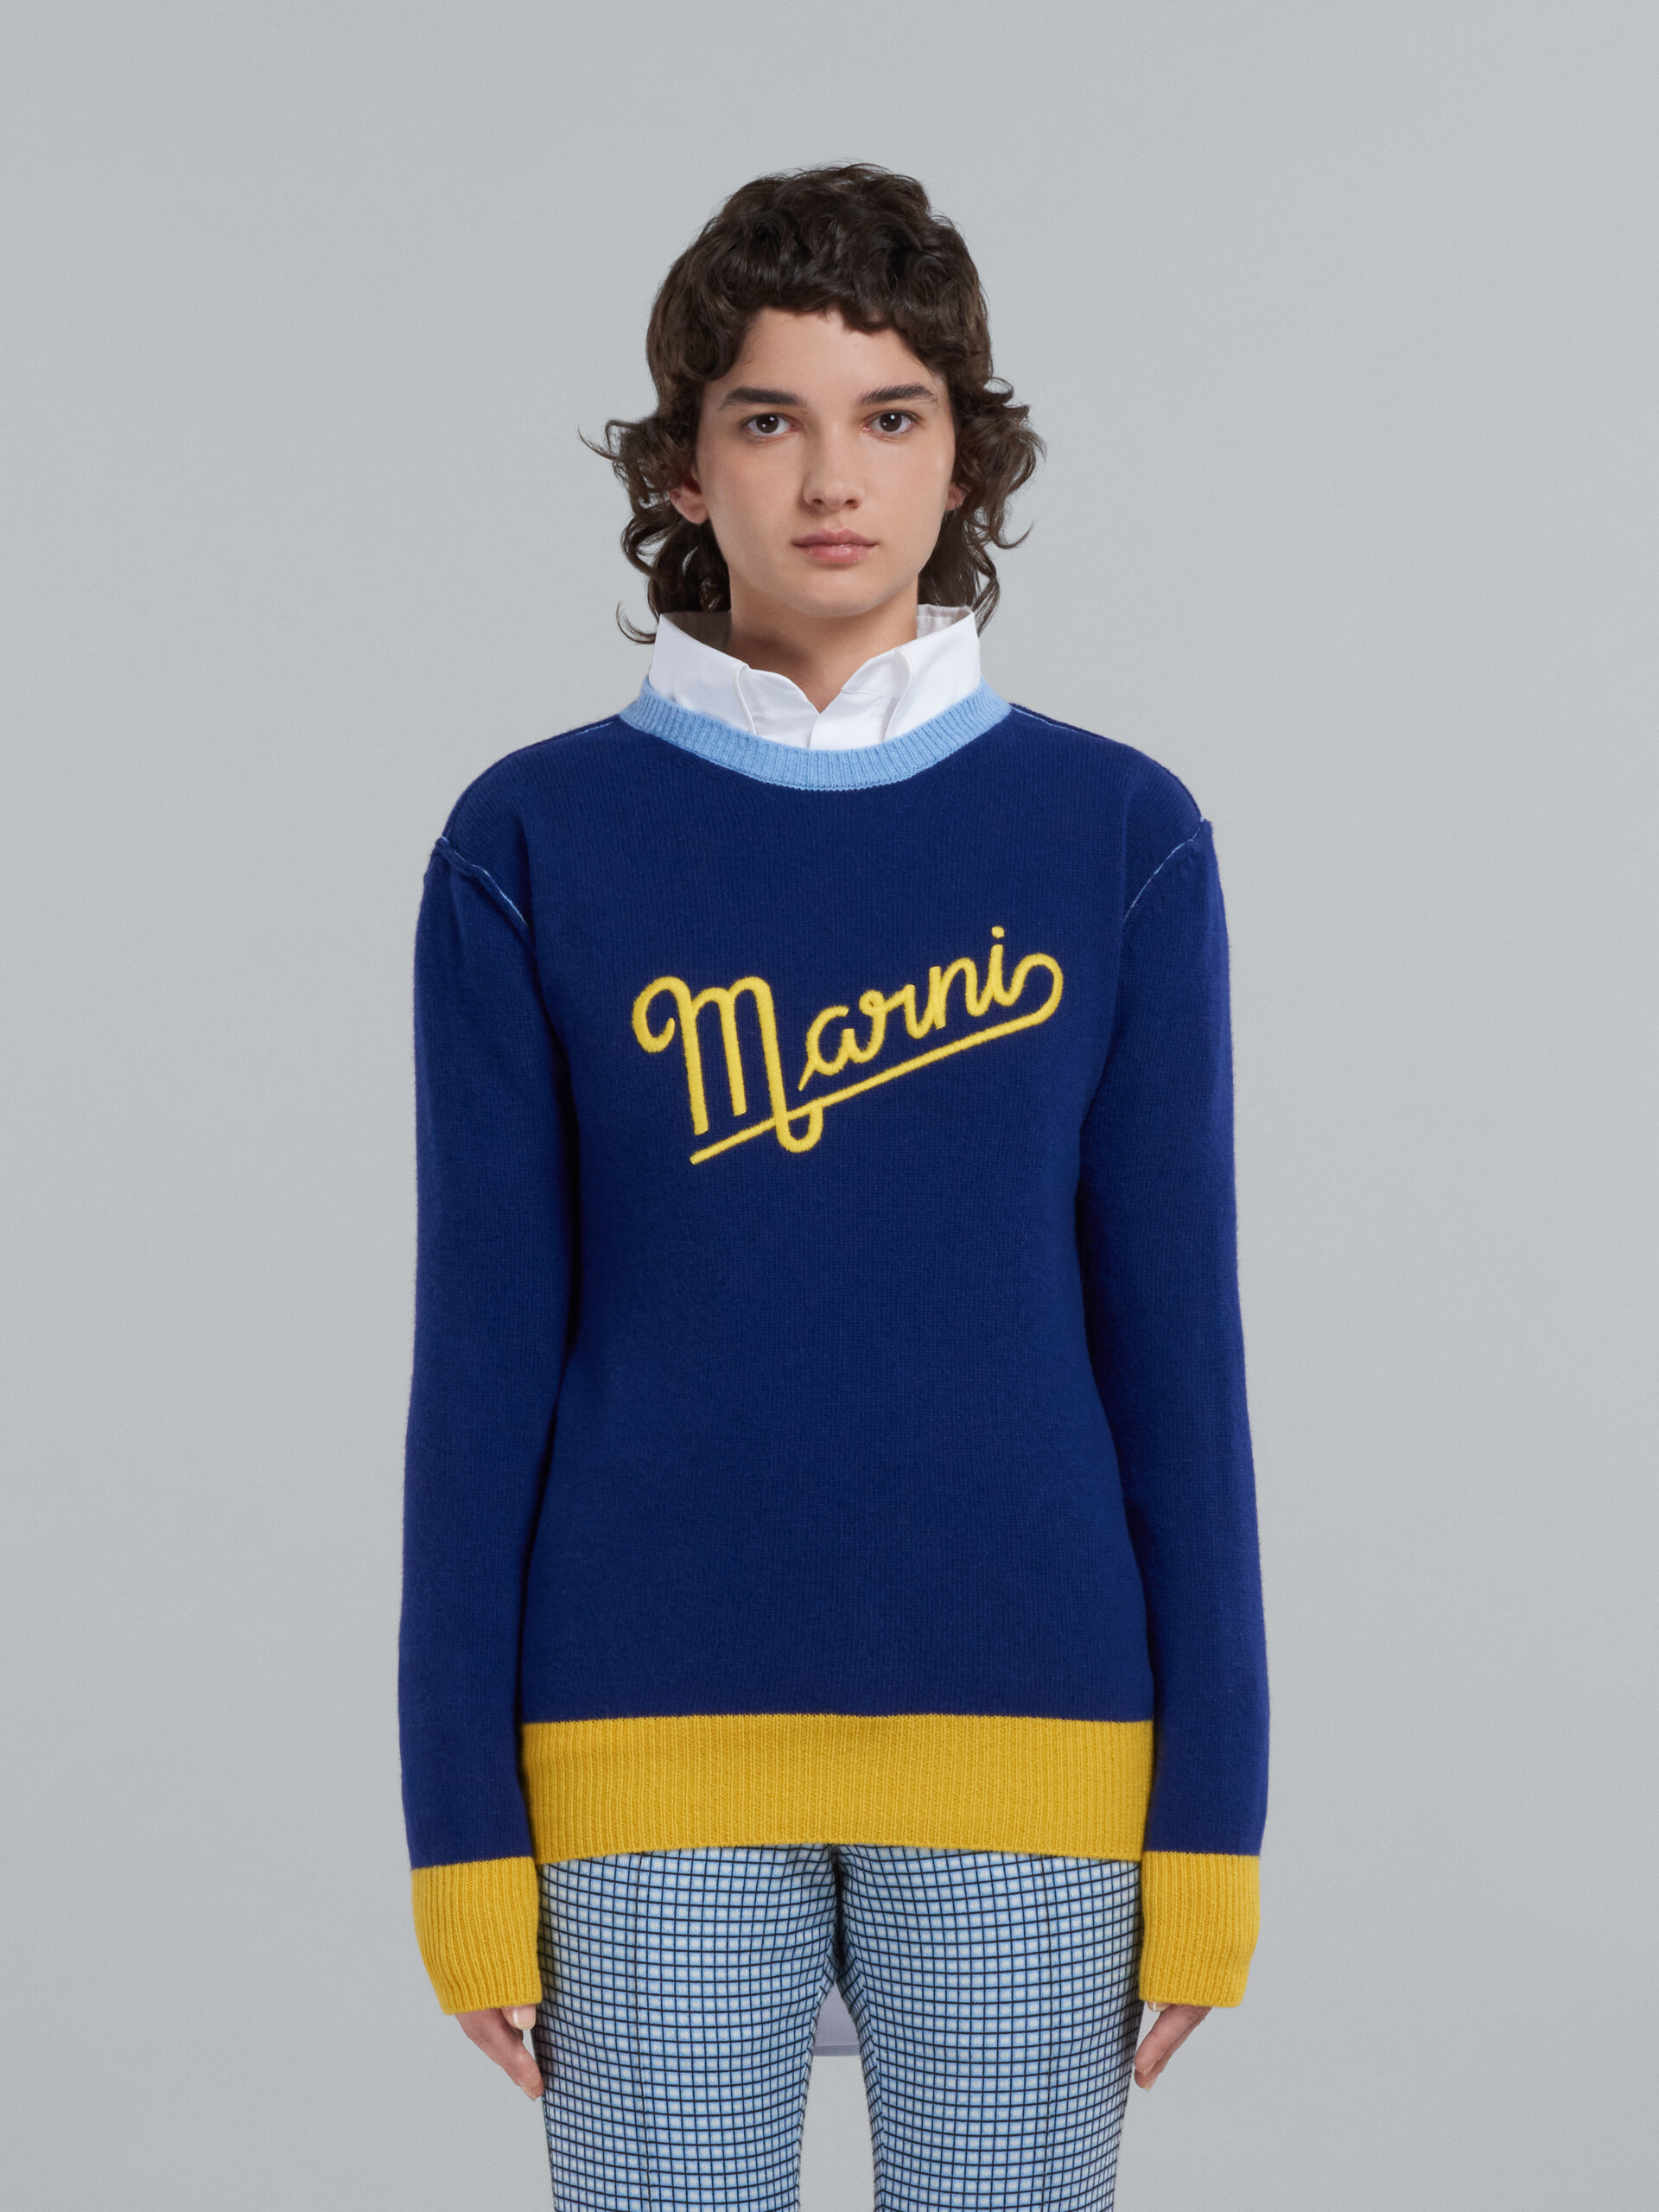 Blue wool sweater with logo - Pullovers - Image 2